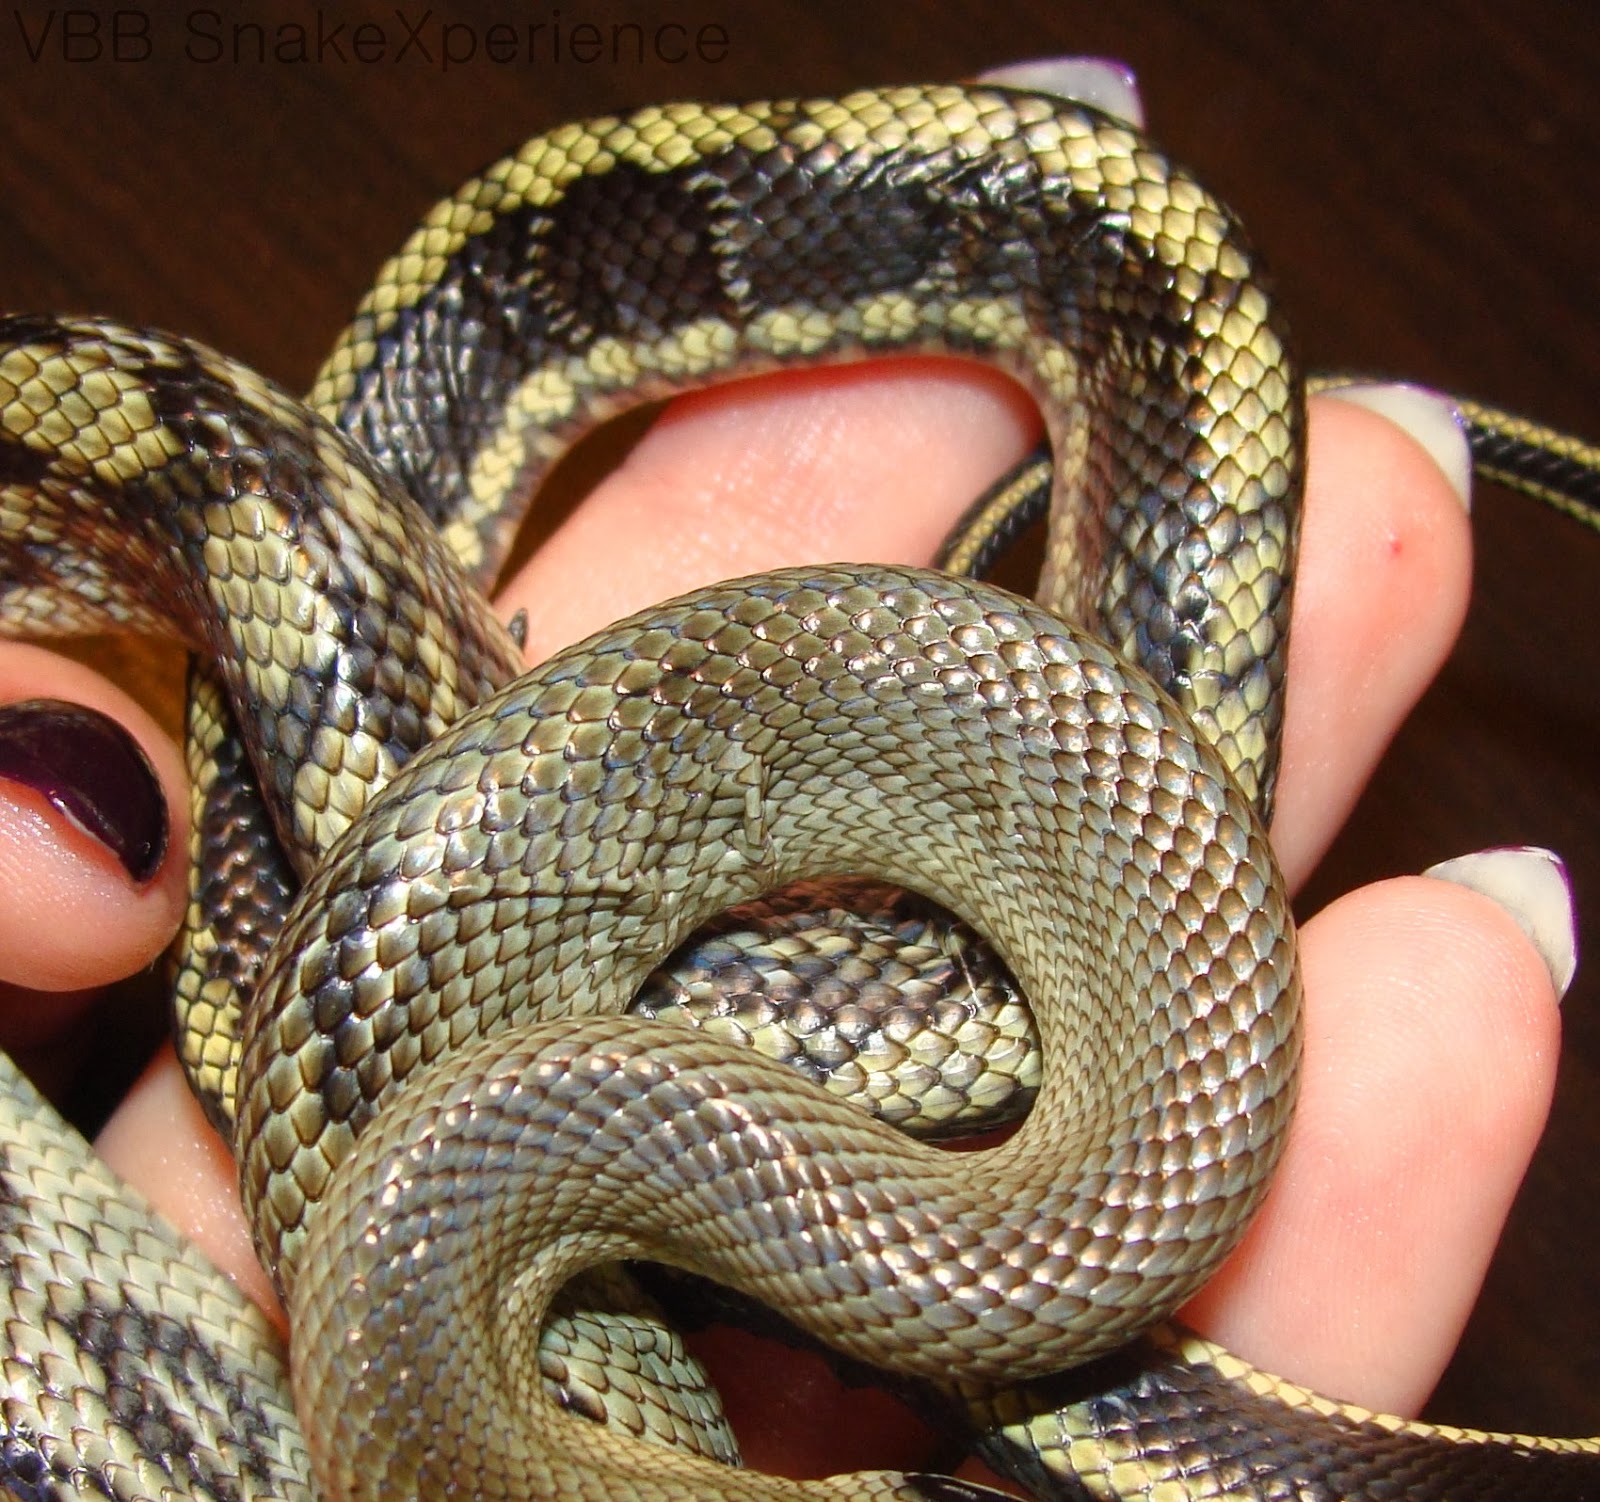 The Vietnamese Blue Beauty snake blog: Bad shed, what to 